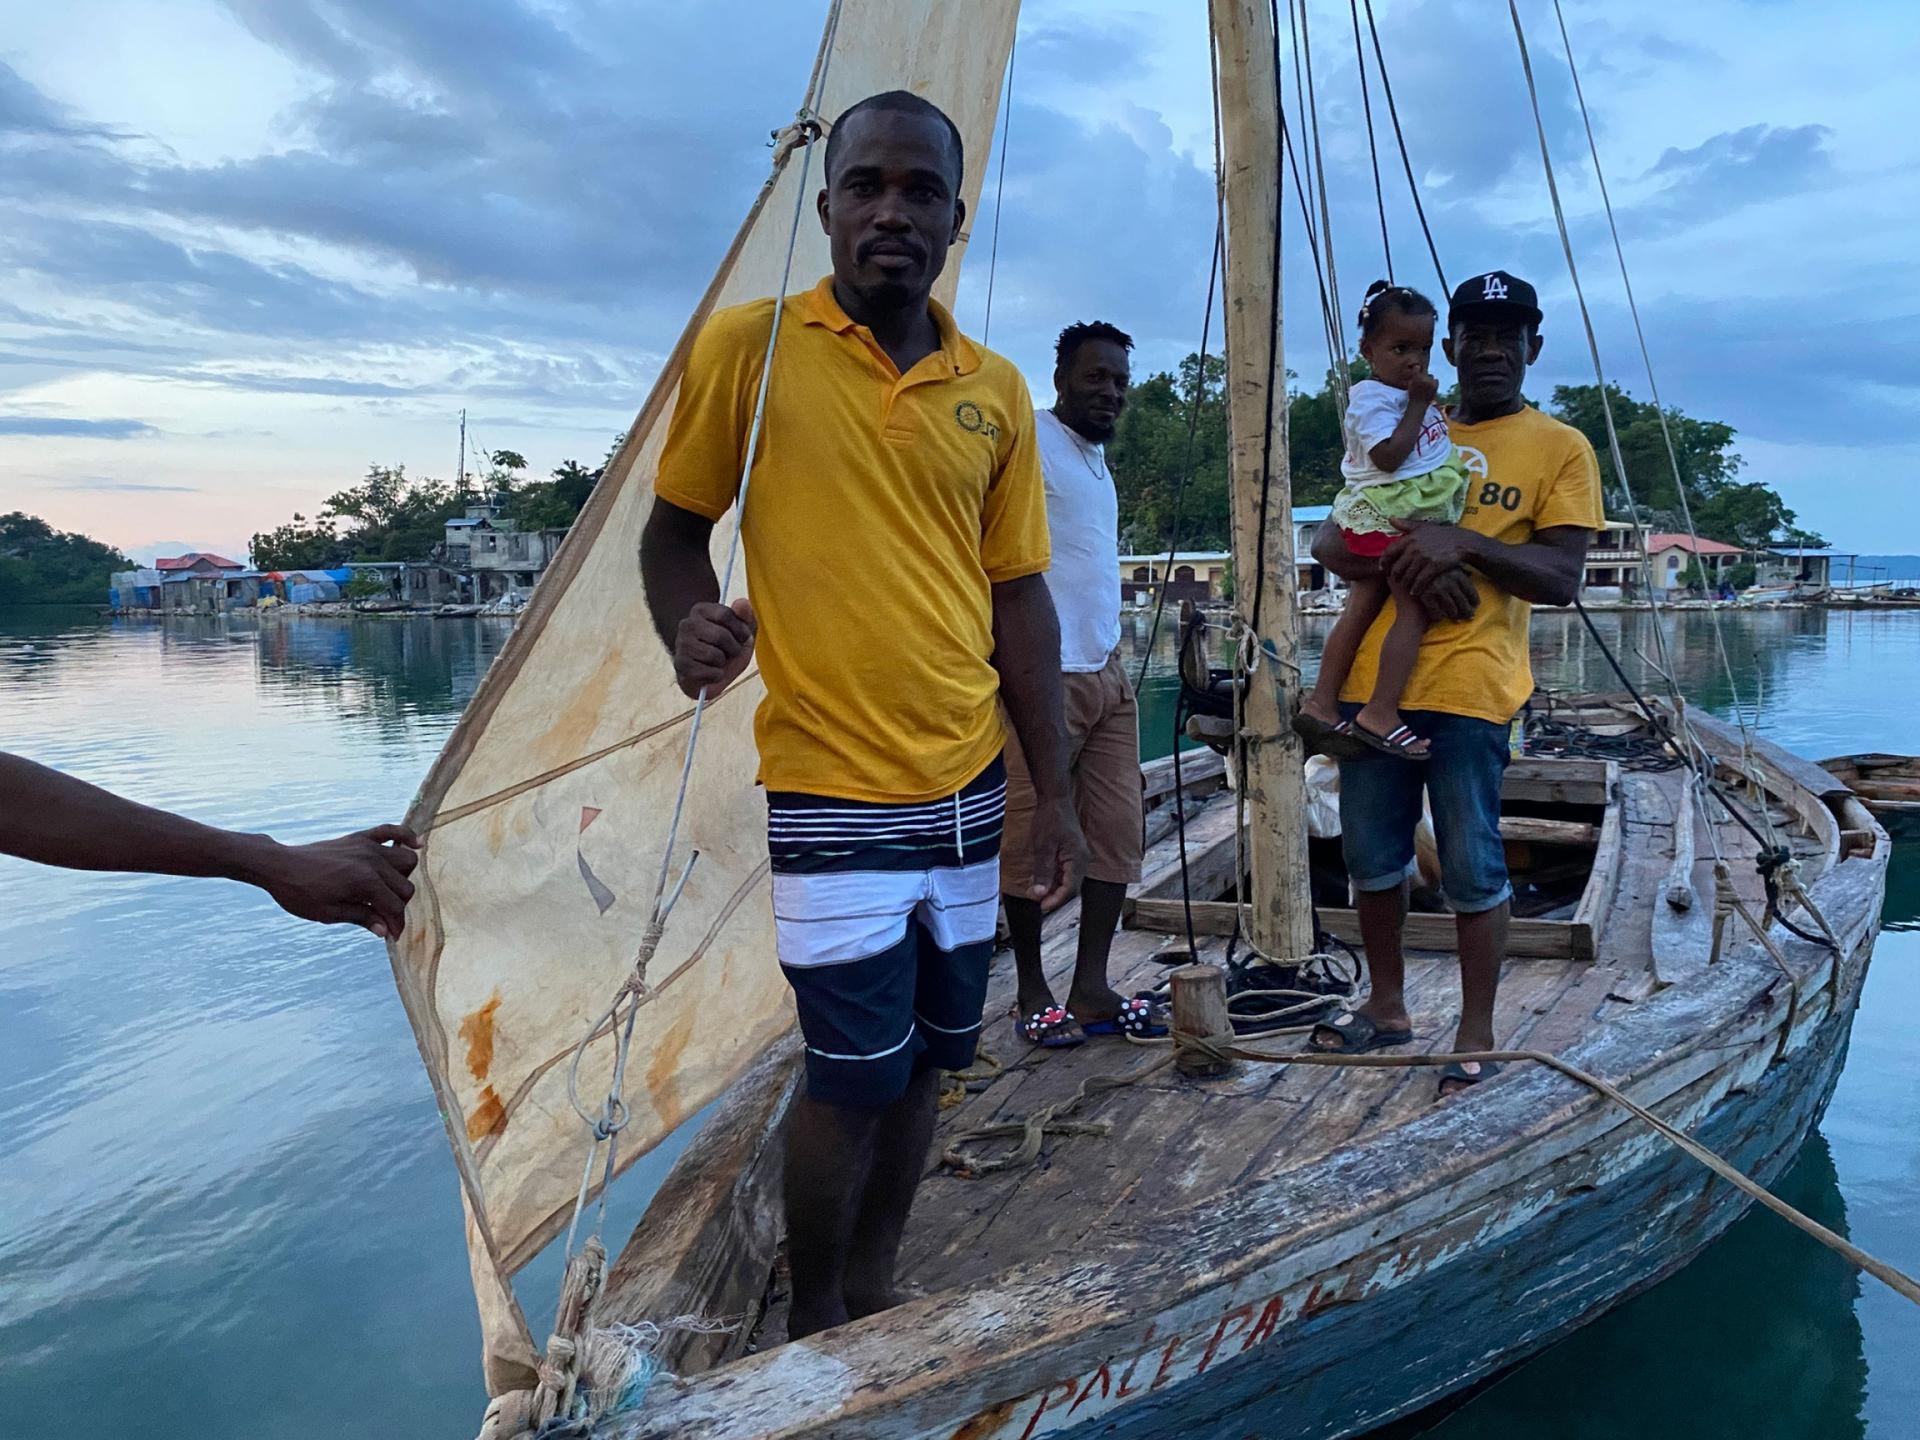 In Pestel, Haiti, on the country's southern peninsula, Jean-Robert Leger, front, stands in a boat that is a bit smaller than the one he has attempted to sail in to the United States, along with many other migrants aboard.